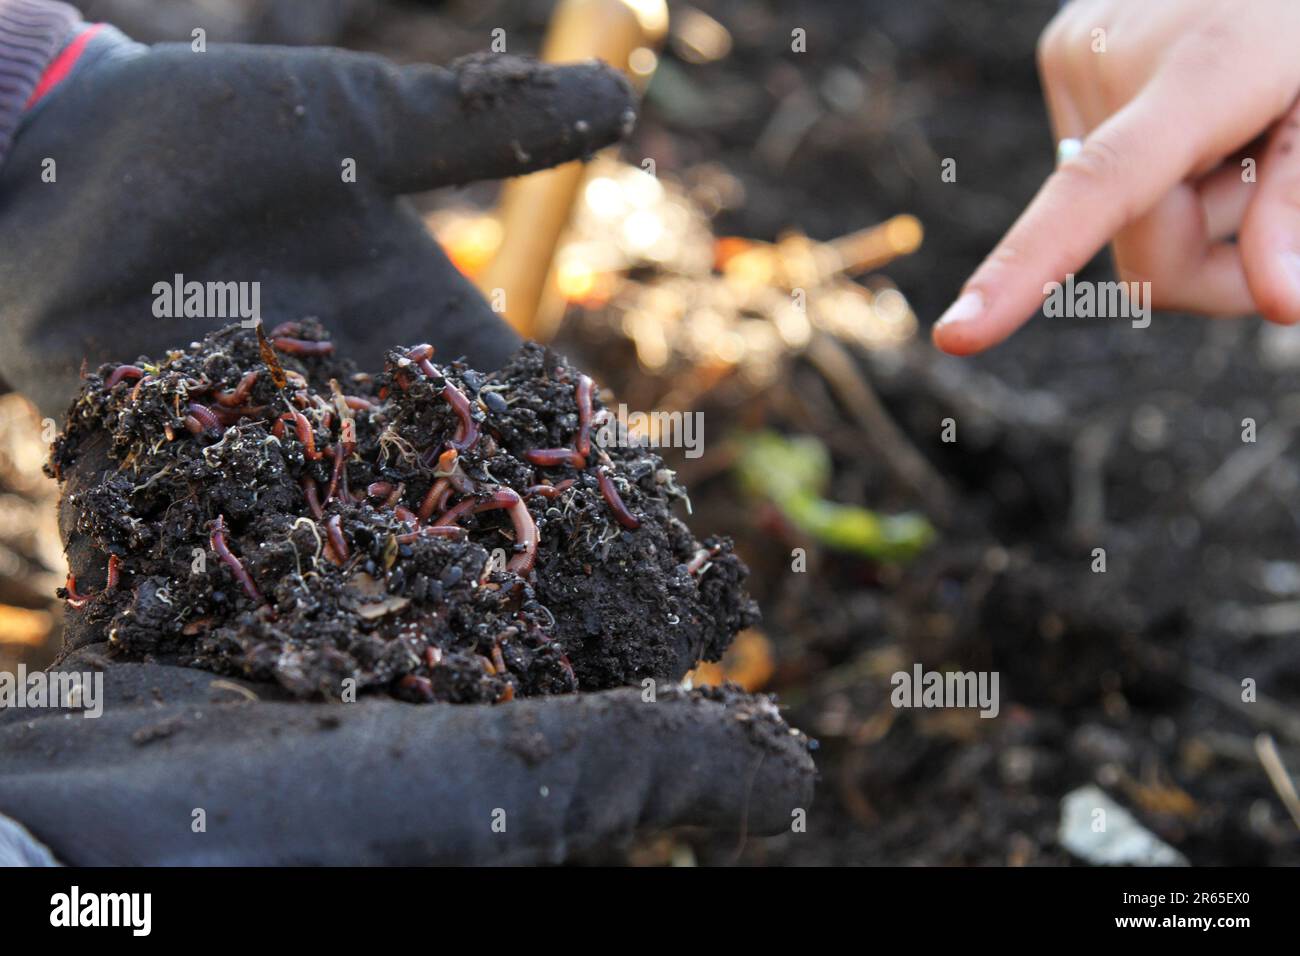 Worms in a jar on green grass, fishing bait and compost worms in a seventh  farm Stock Photo - Alamy